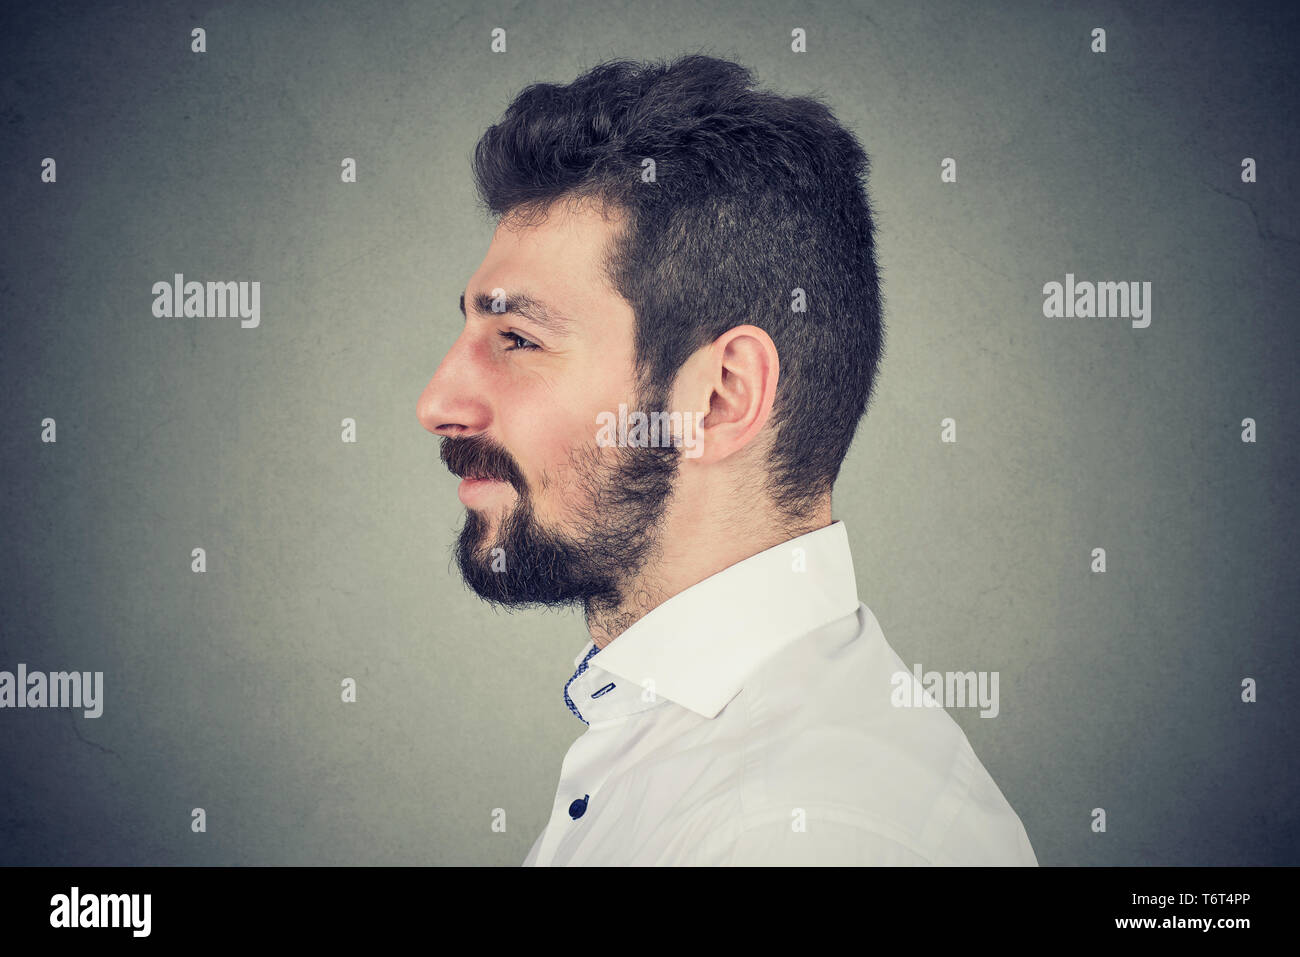 Side view portrait of a young smiling bearded man Stock Photo